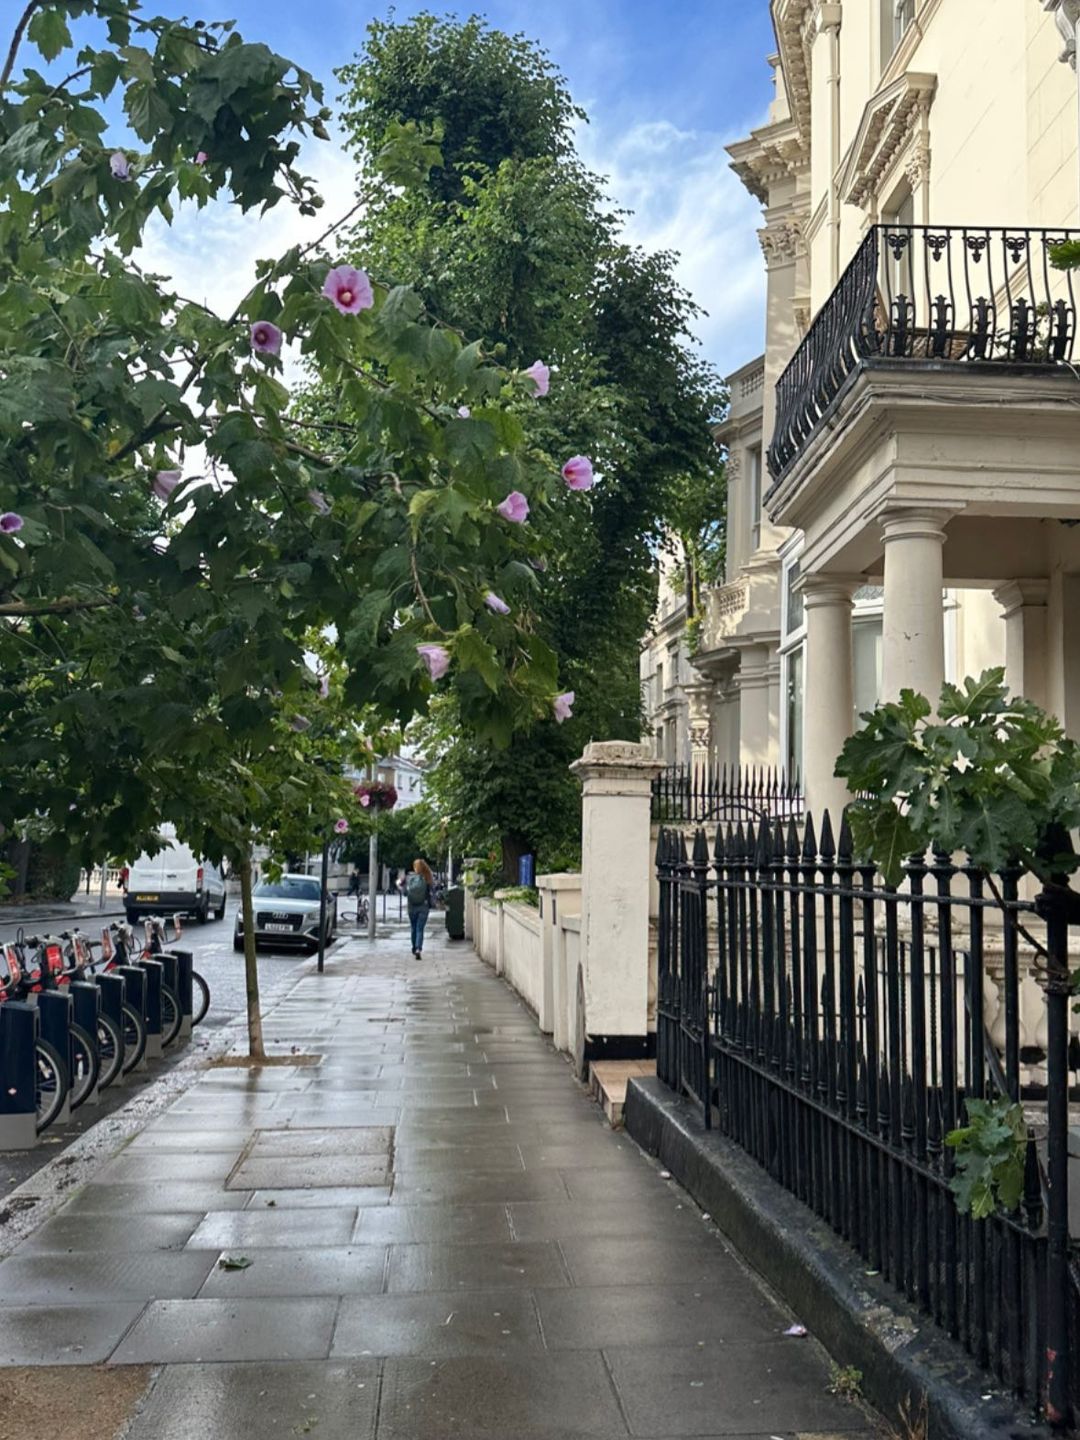 A street in London, framed by green trees and shrubs, all dampened by rain